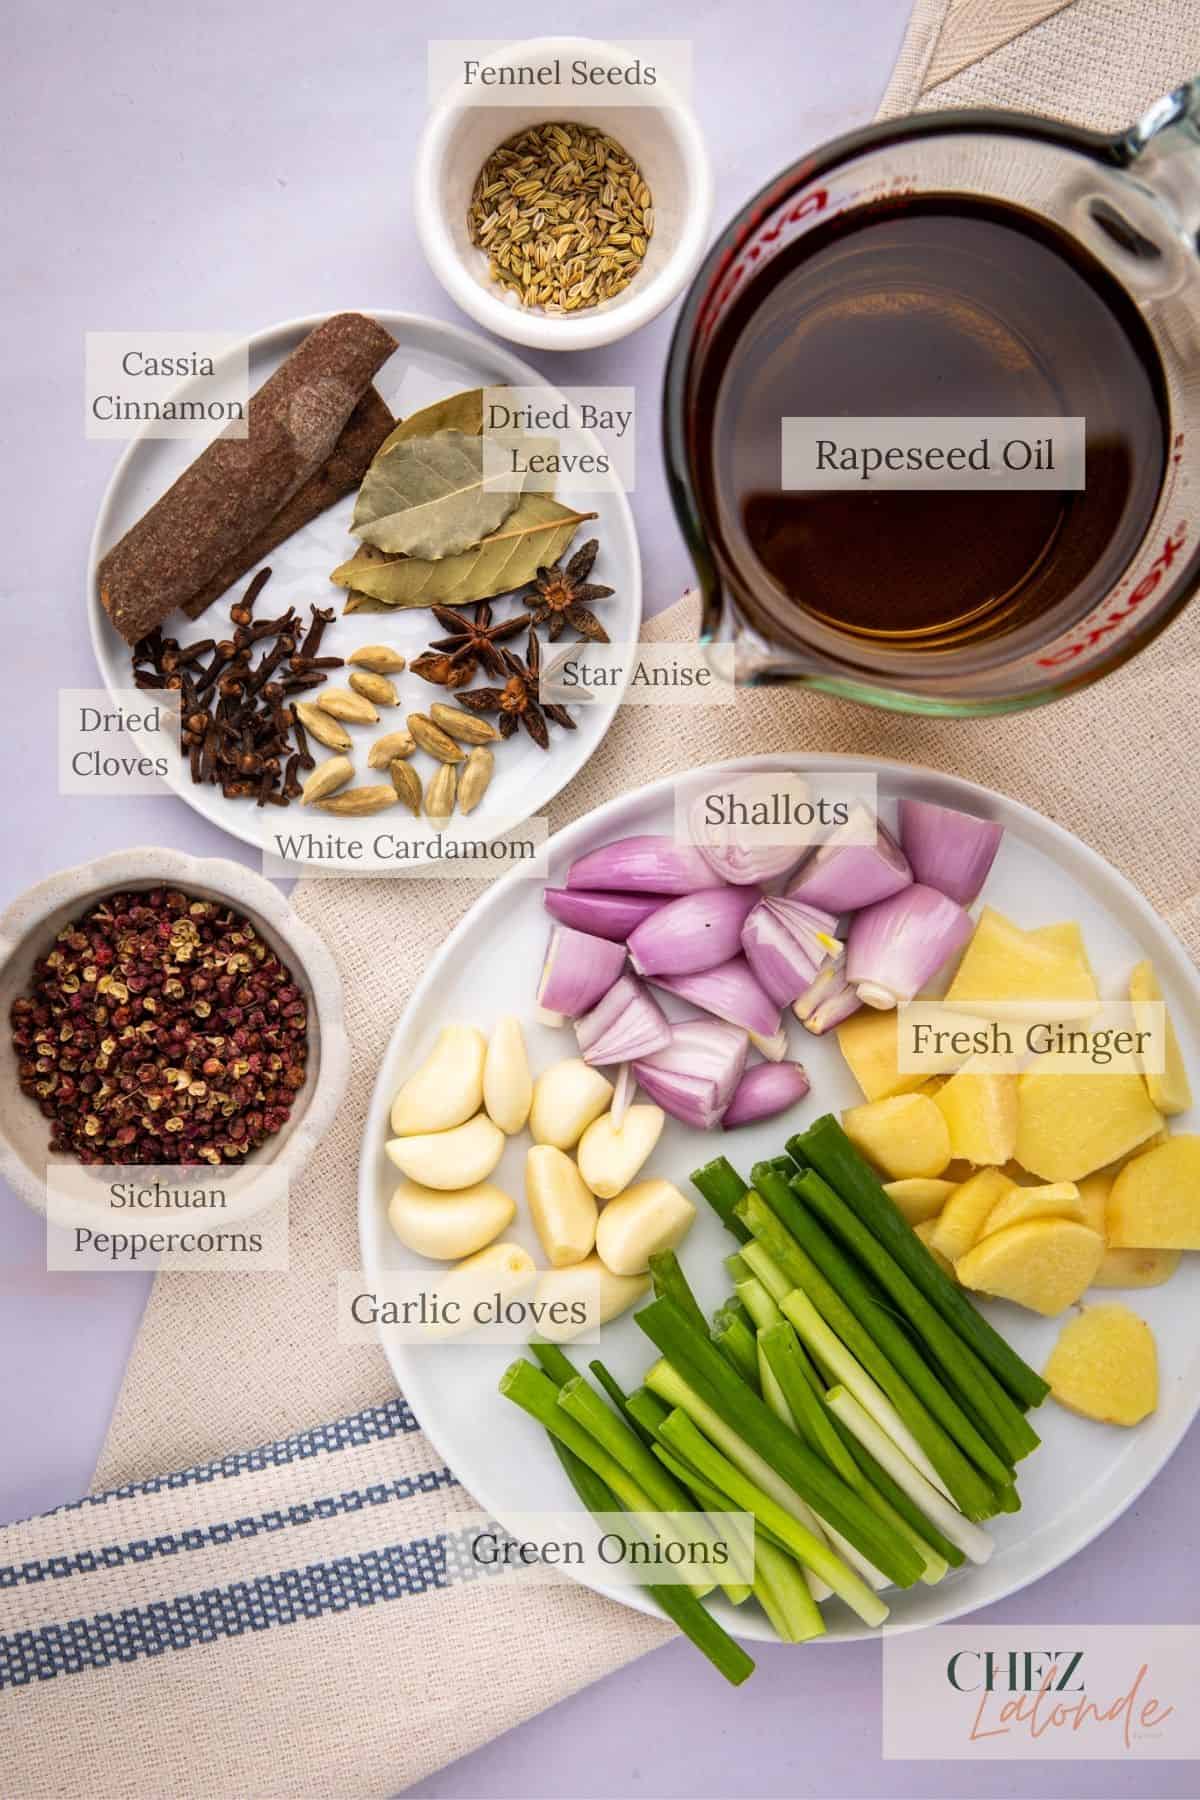 Group One ingredients : All ingredients needed for making Homemade chinese Chili Oil. You will need Rapeseed oil, Green onion, ginger, garlic, shallot, cassia cinnamon, Sichuan Peppercorn, Bay leaves, star anise, dried cloves, white cardamom, fennel seeds.